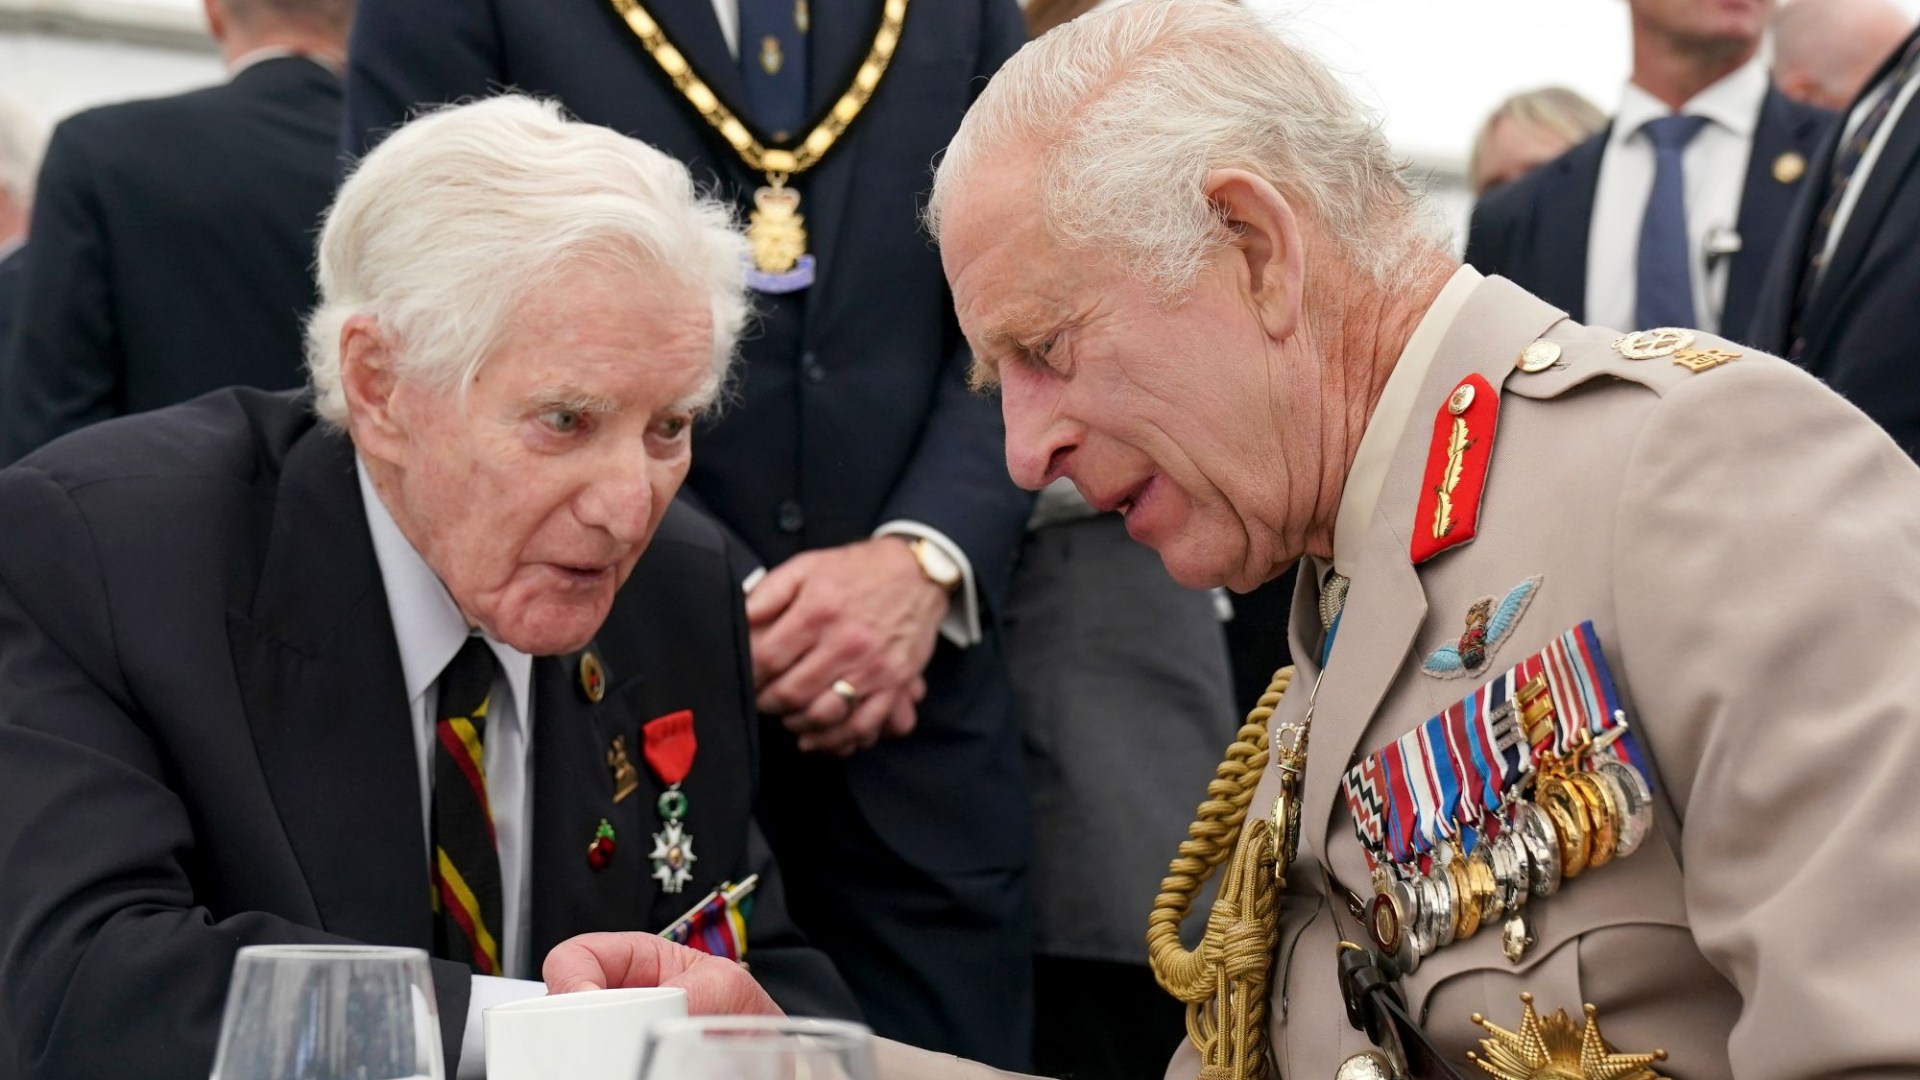 Brave Charles was having cancer treatment but still made it to two D-Day events – he was desperate to honour the fallen [Video]